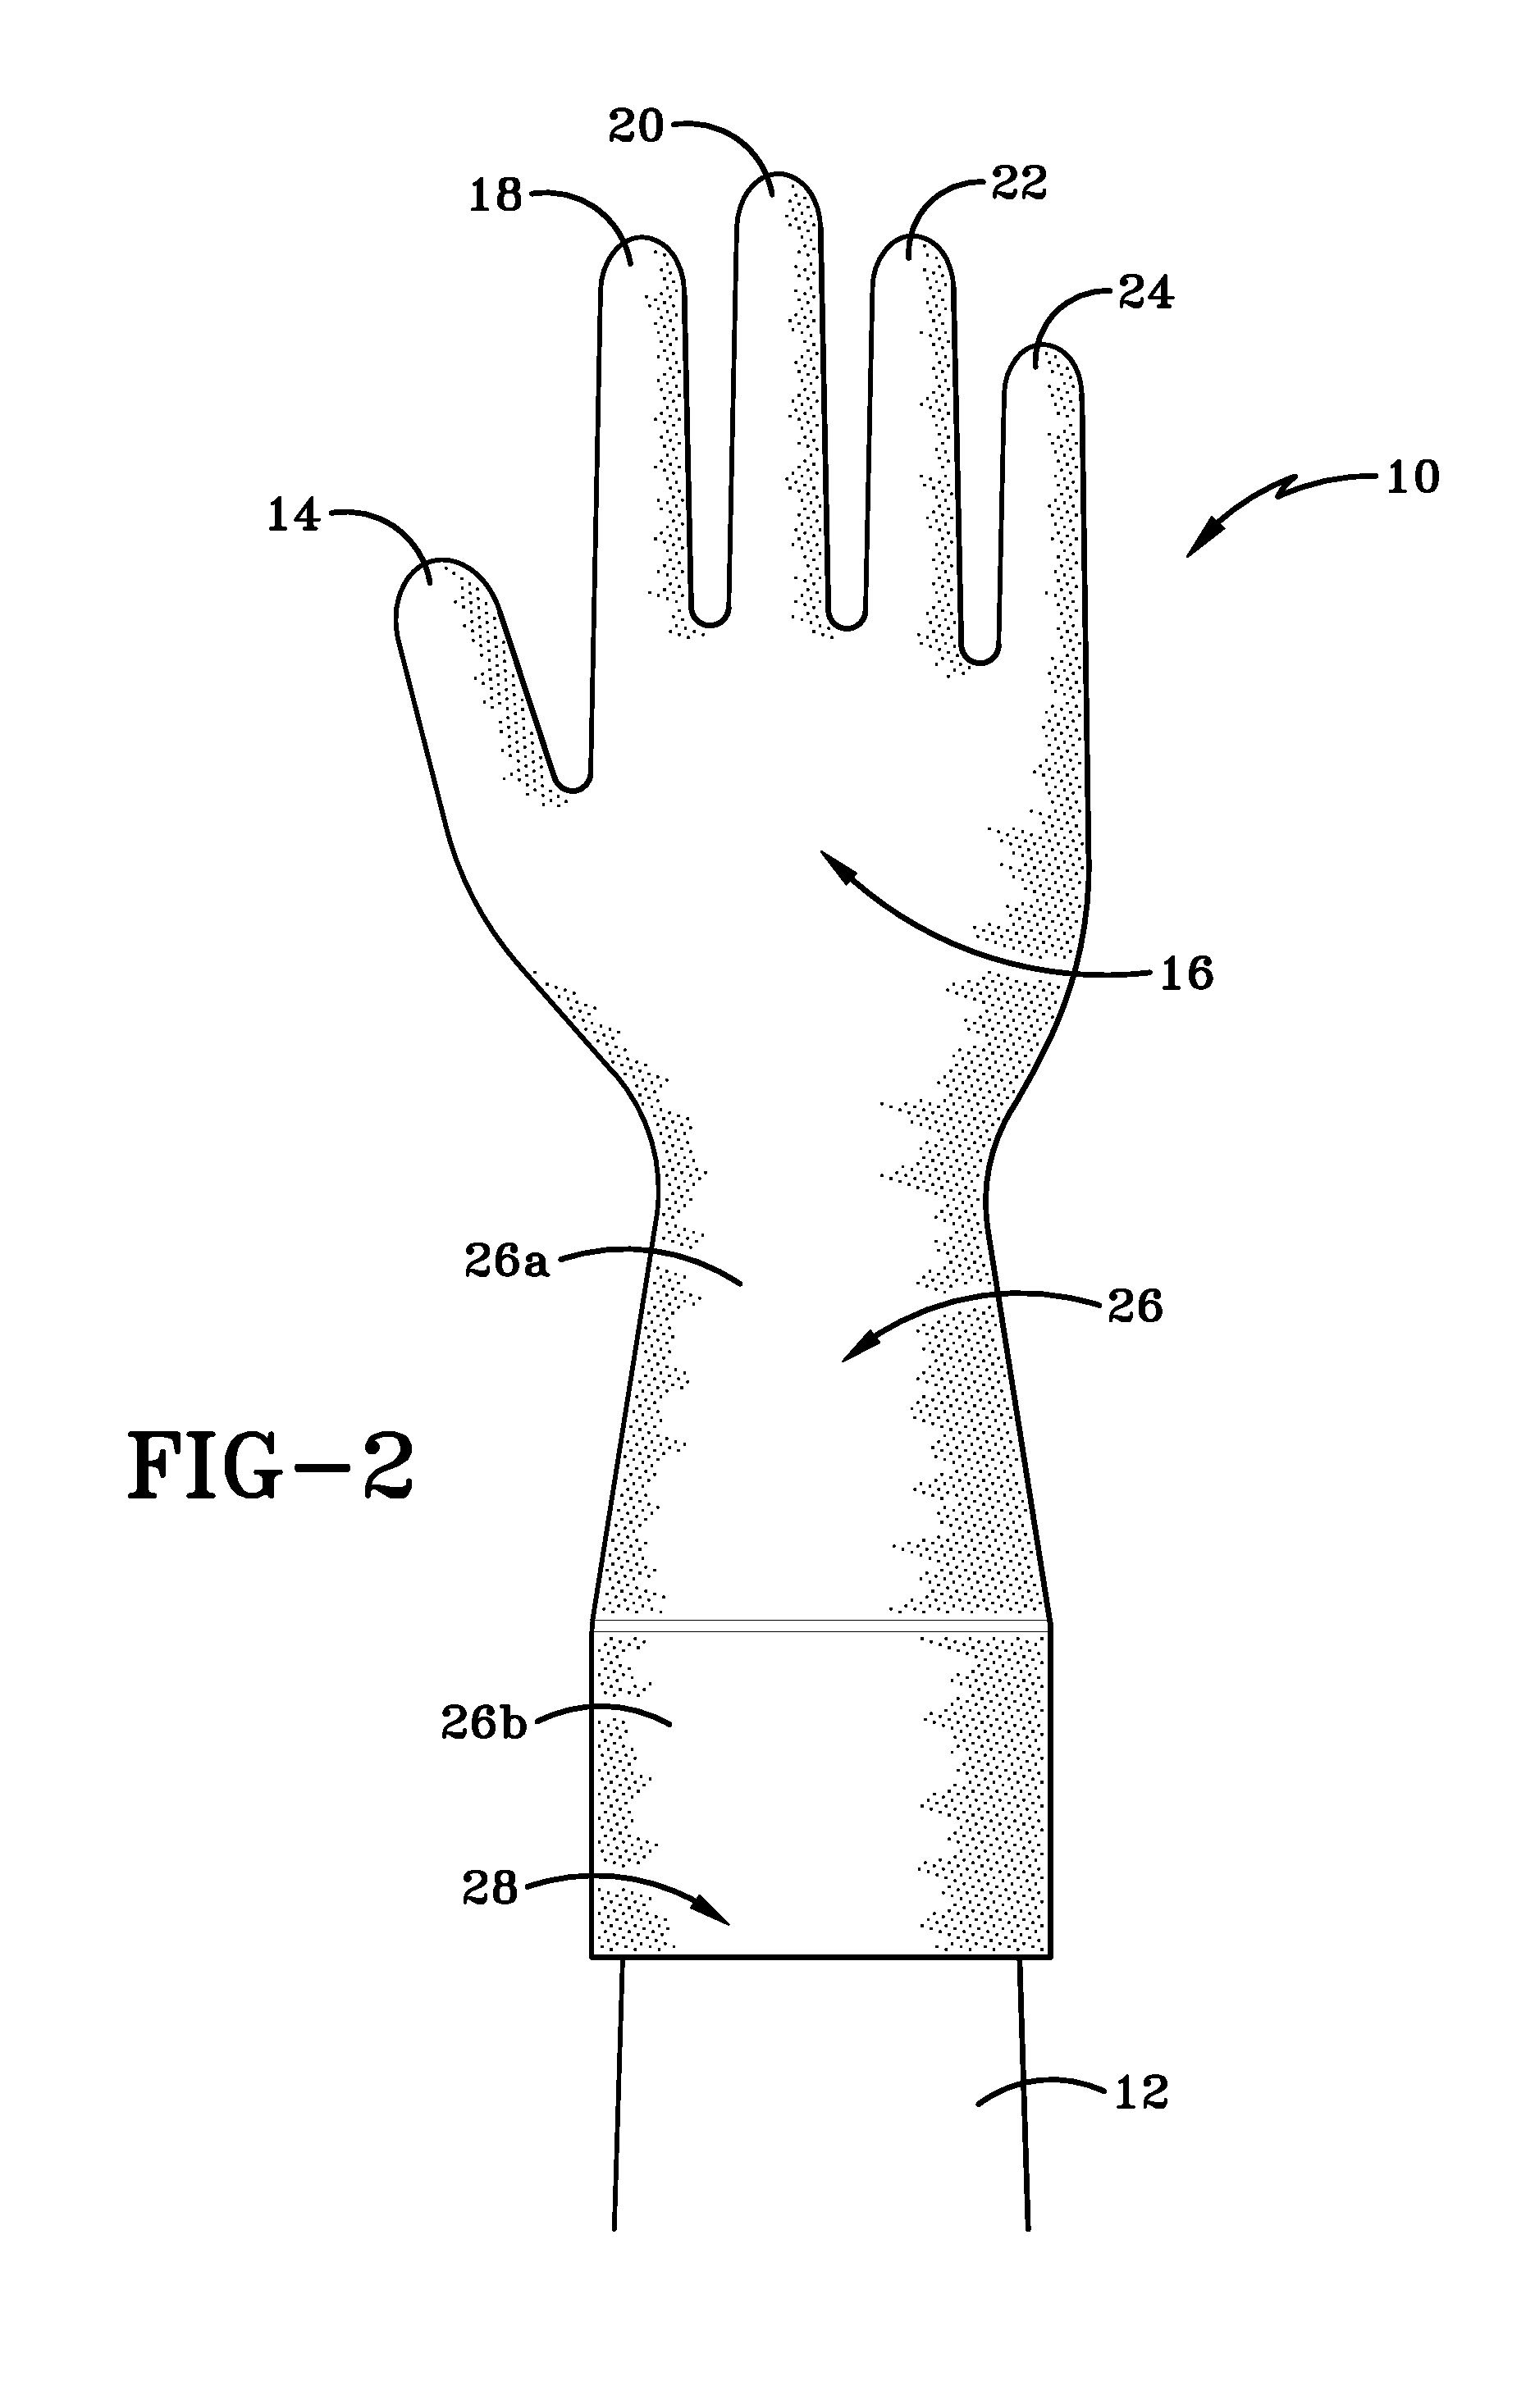 Glove having a widened cuff and with finger regions that include a flexible hinge region